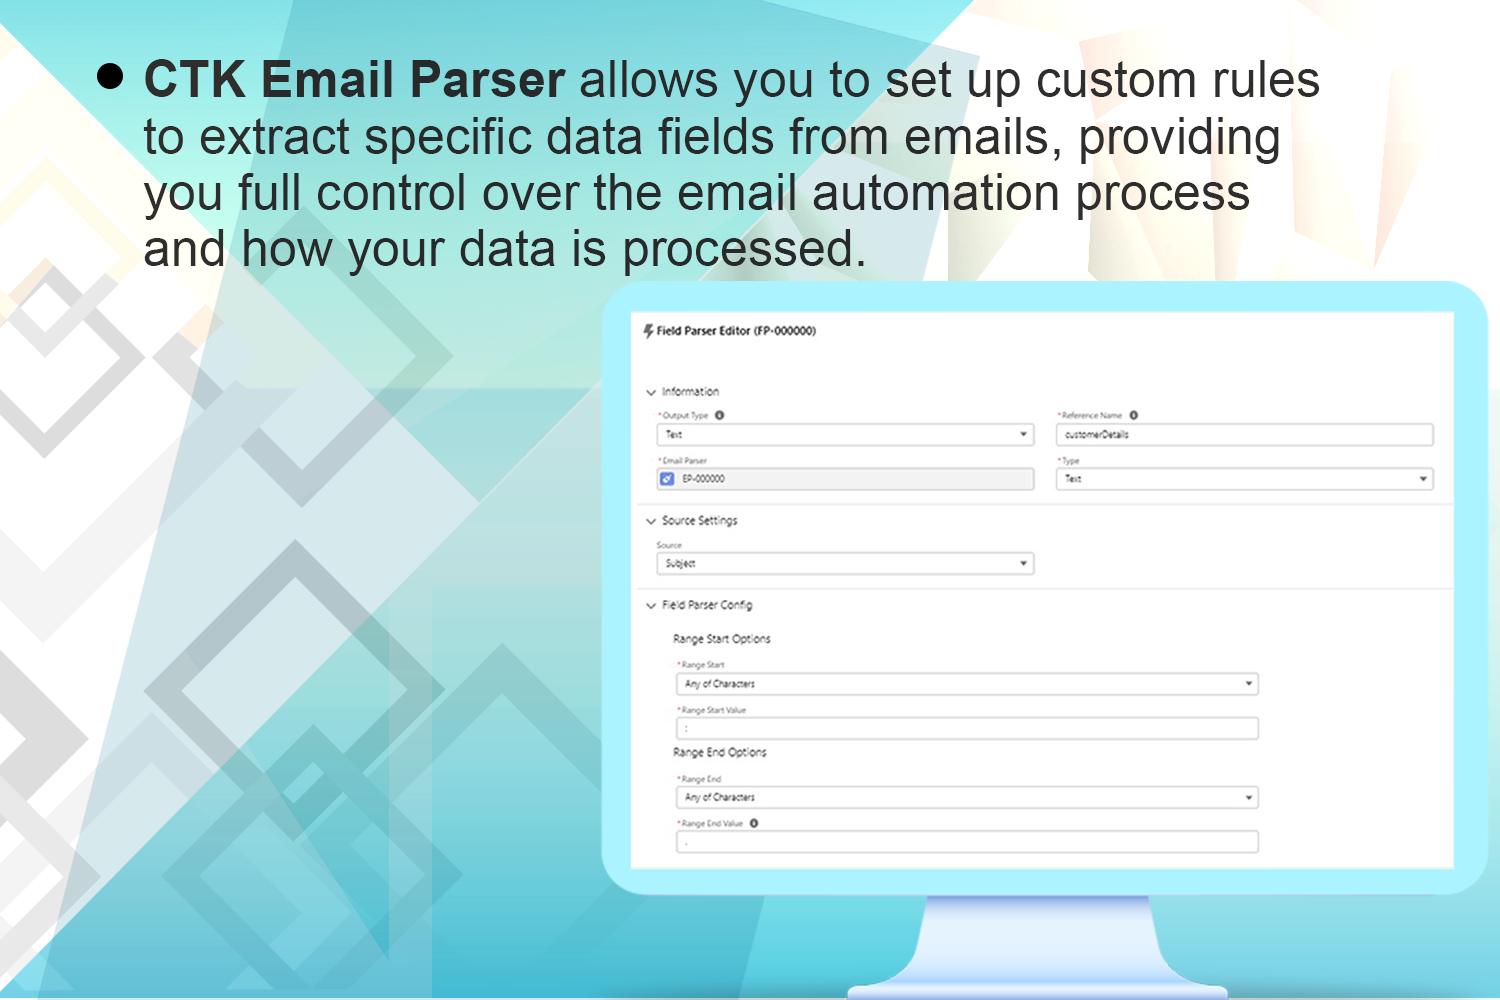 Set up custom rules to extract data fields from email